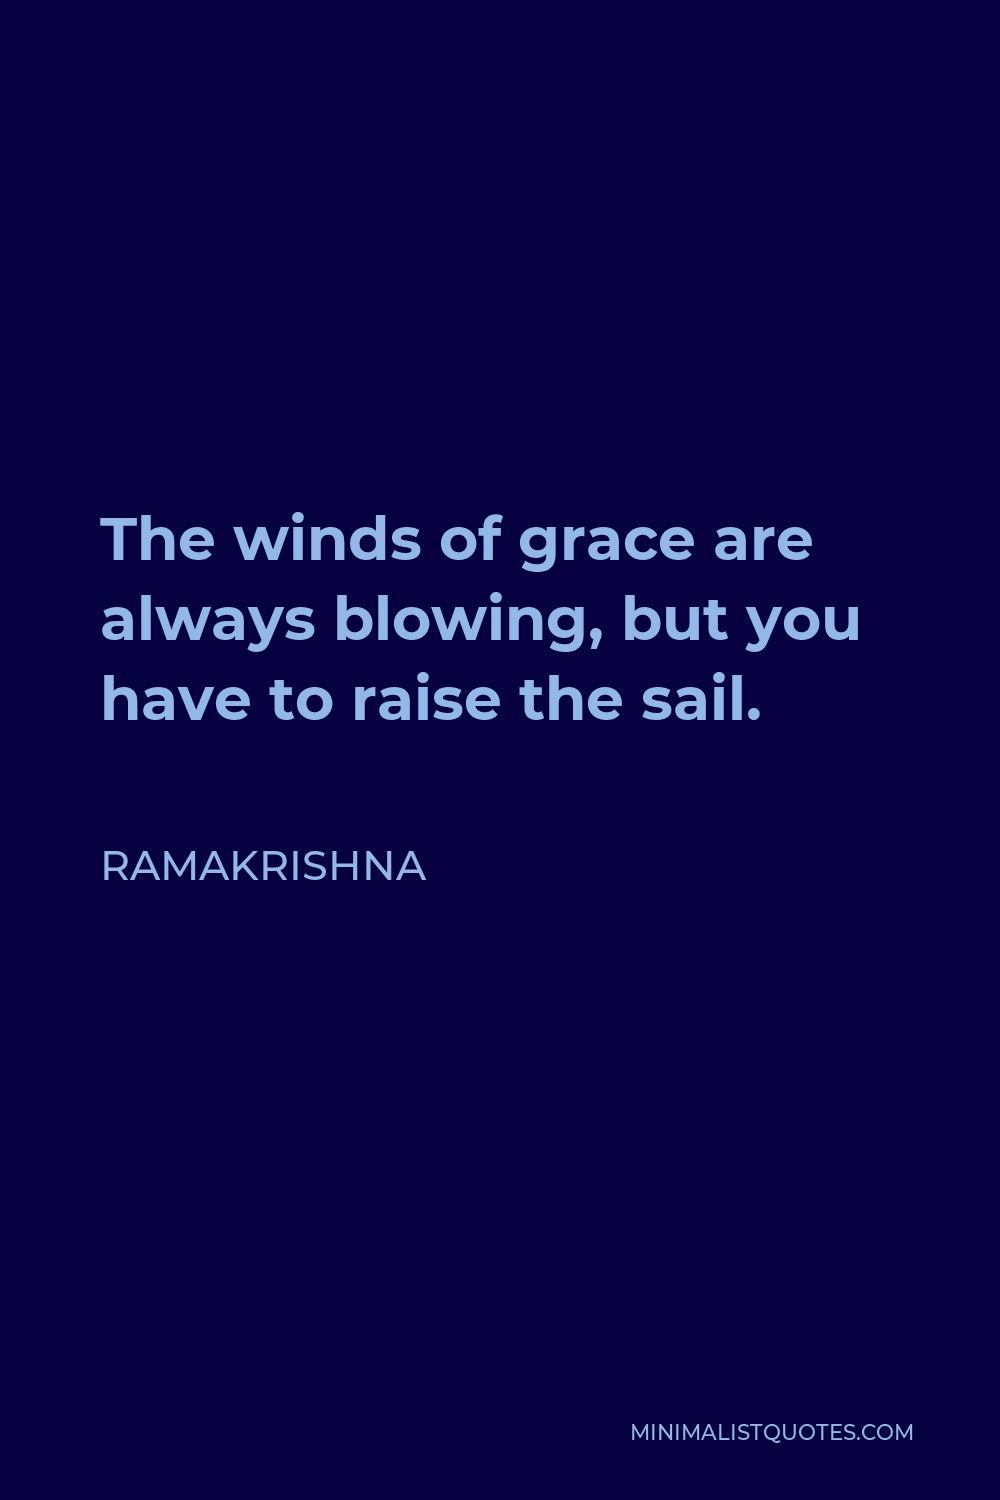 Ramakrishna Quote - The winds of grace are always blowing, but you have to raise the sail.